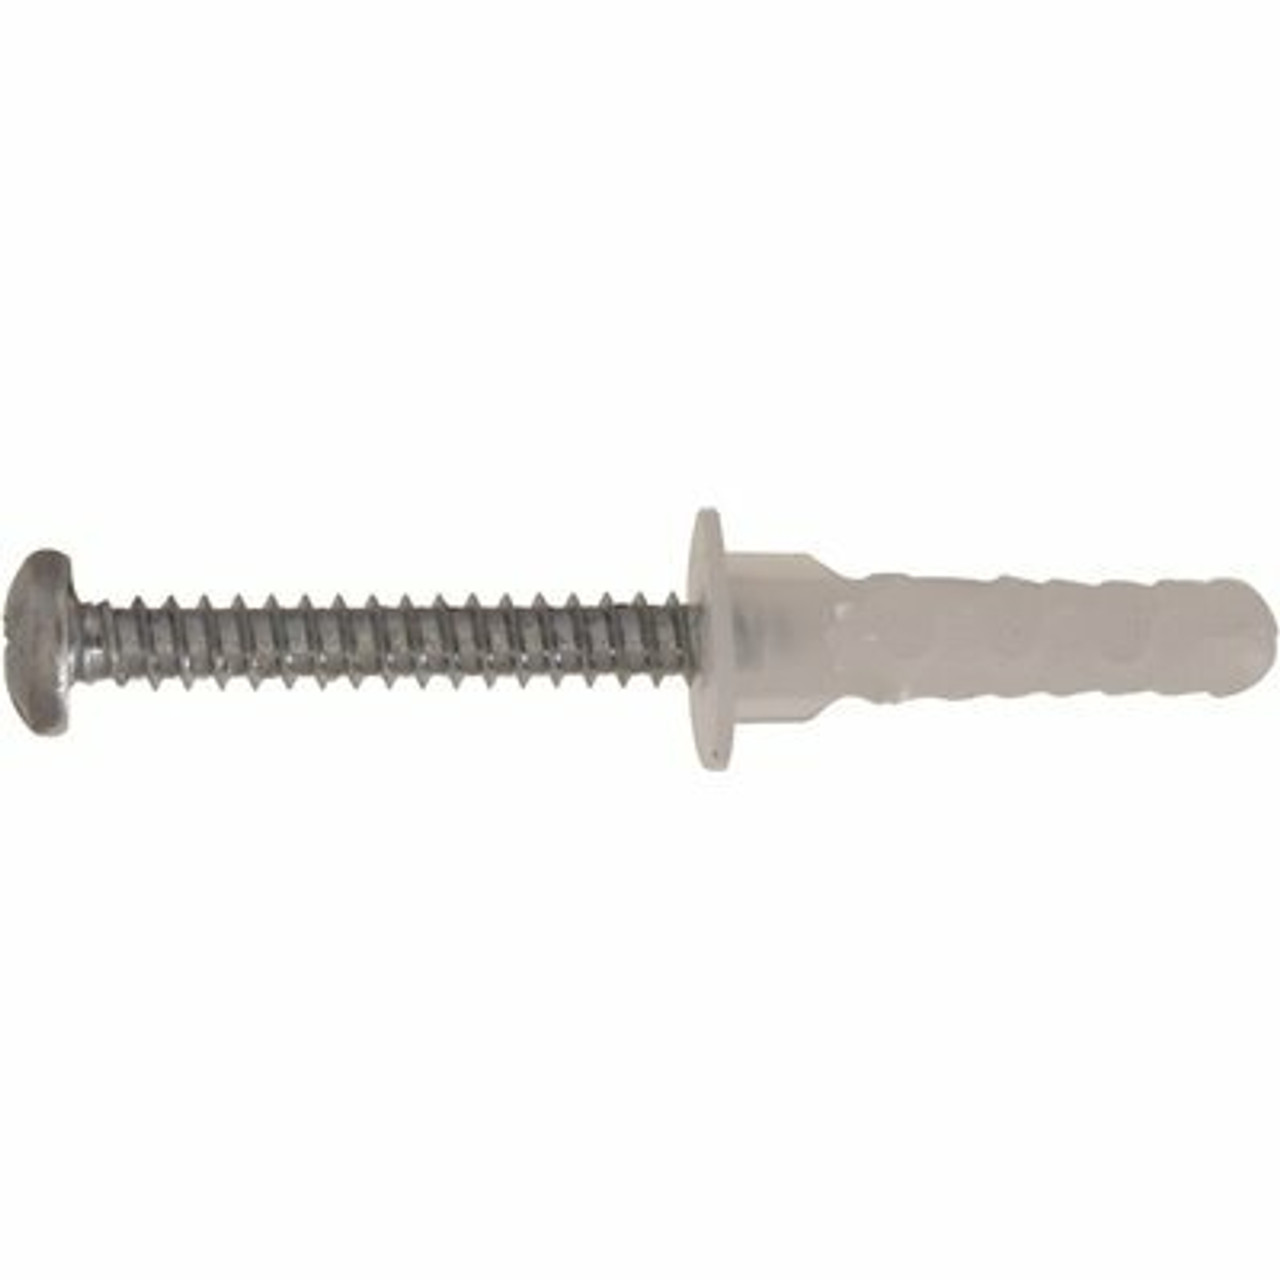 Hillman #4-10 Sharkie Hollow Wall Anchor With Screw (6-Pack)